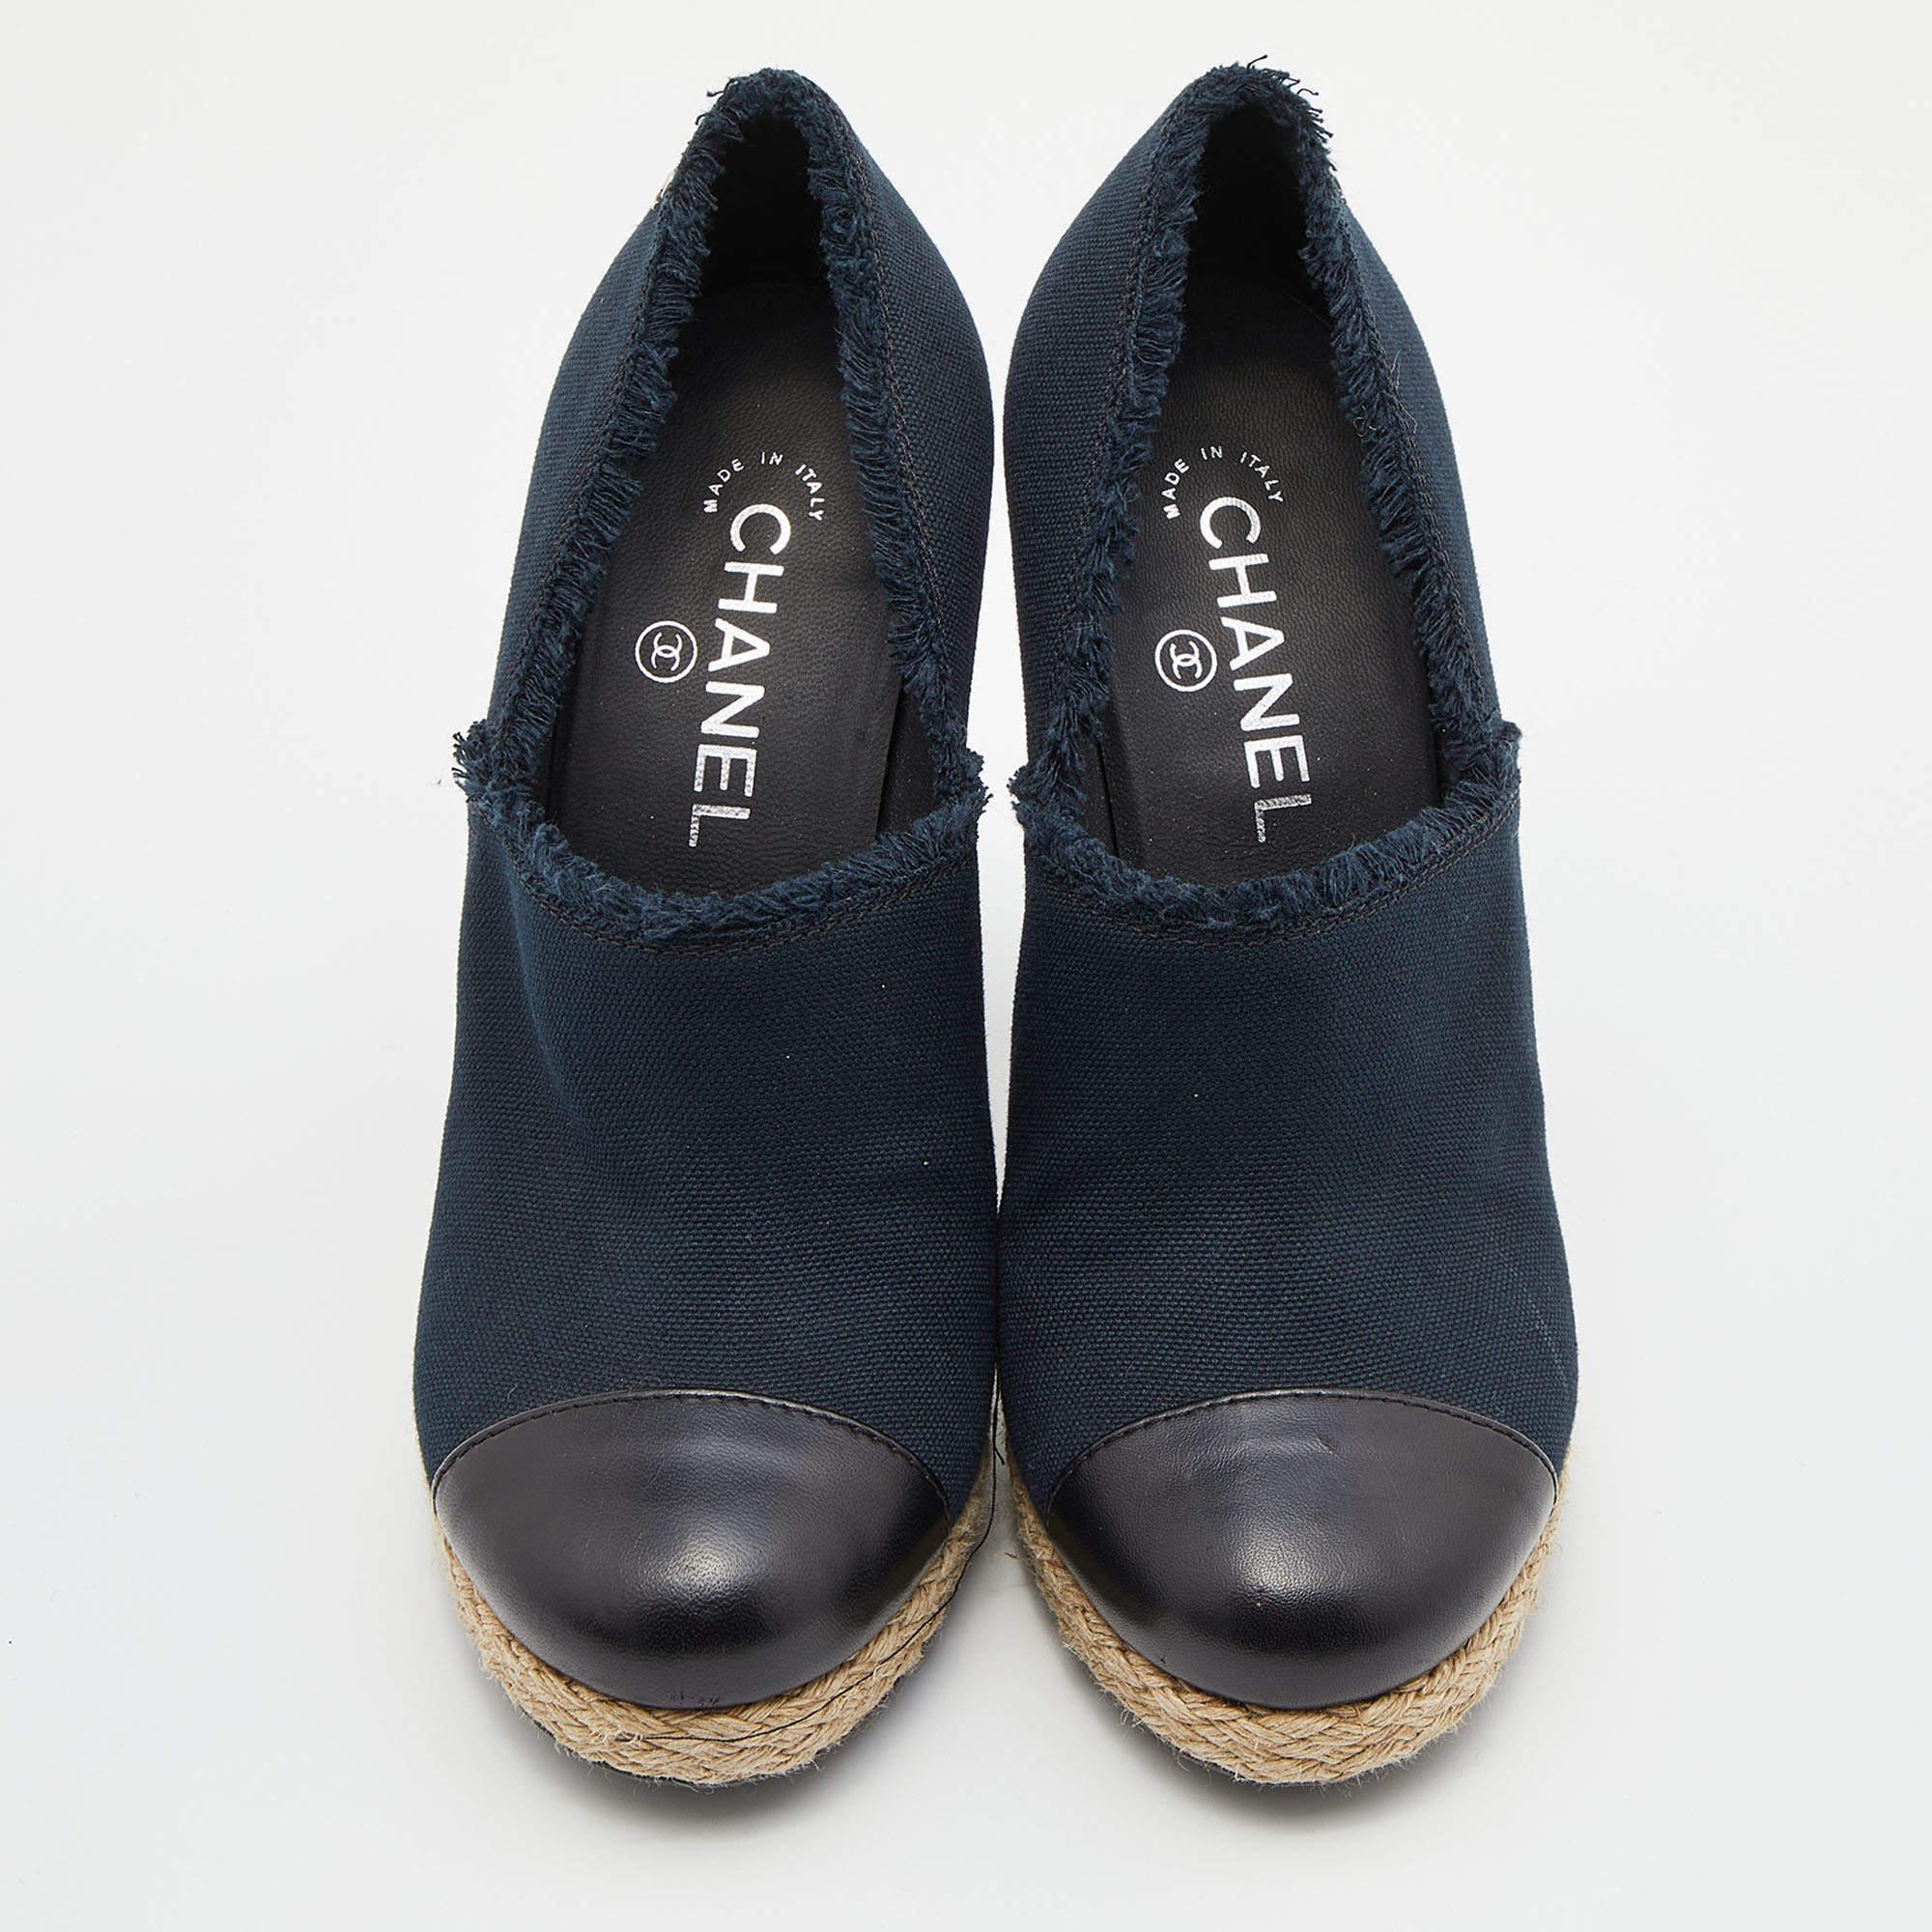 Wonderfully-crafted shoes added with notable elements to fit well and pair perfectly with all your plans. Make these Chanel clogs yours today!

